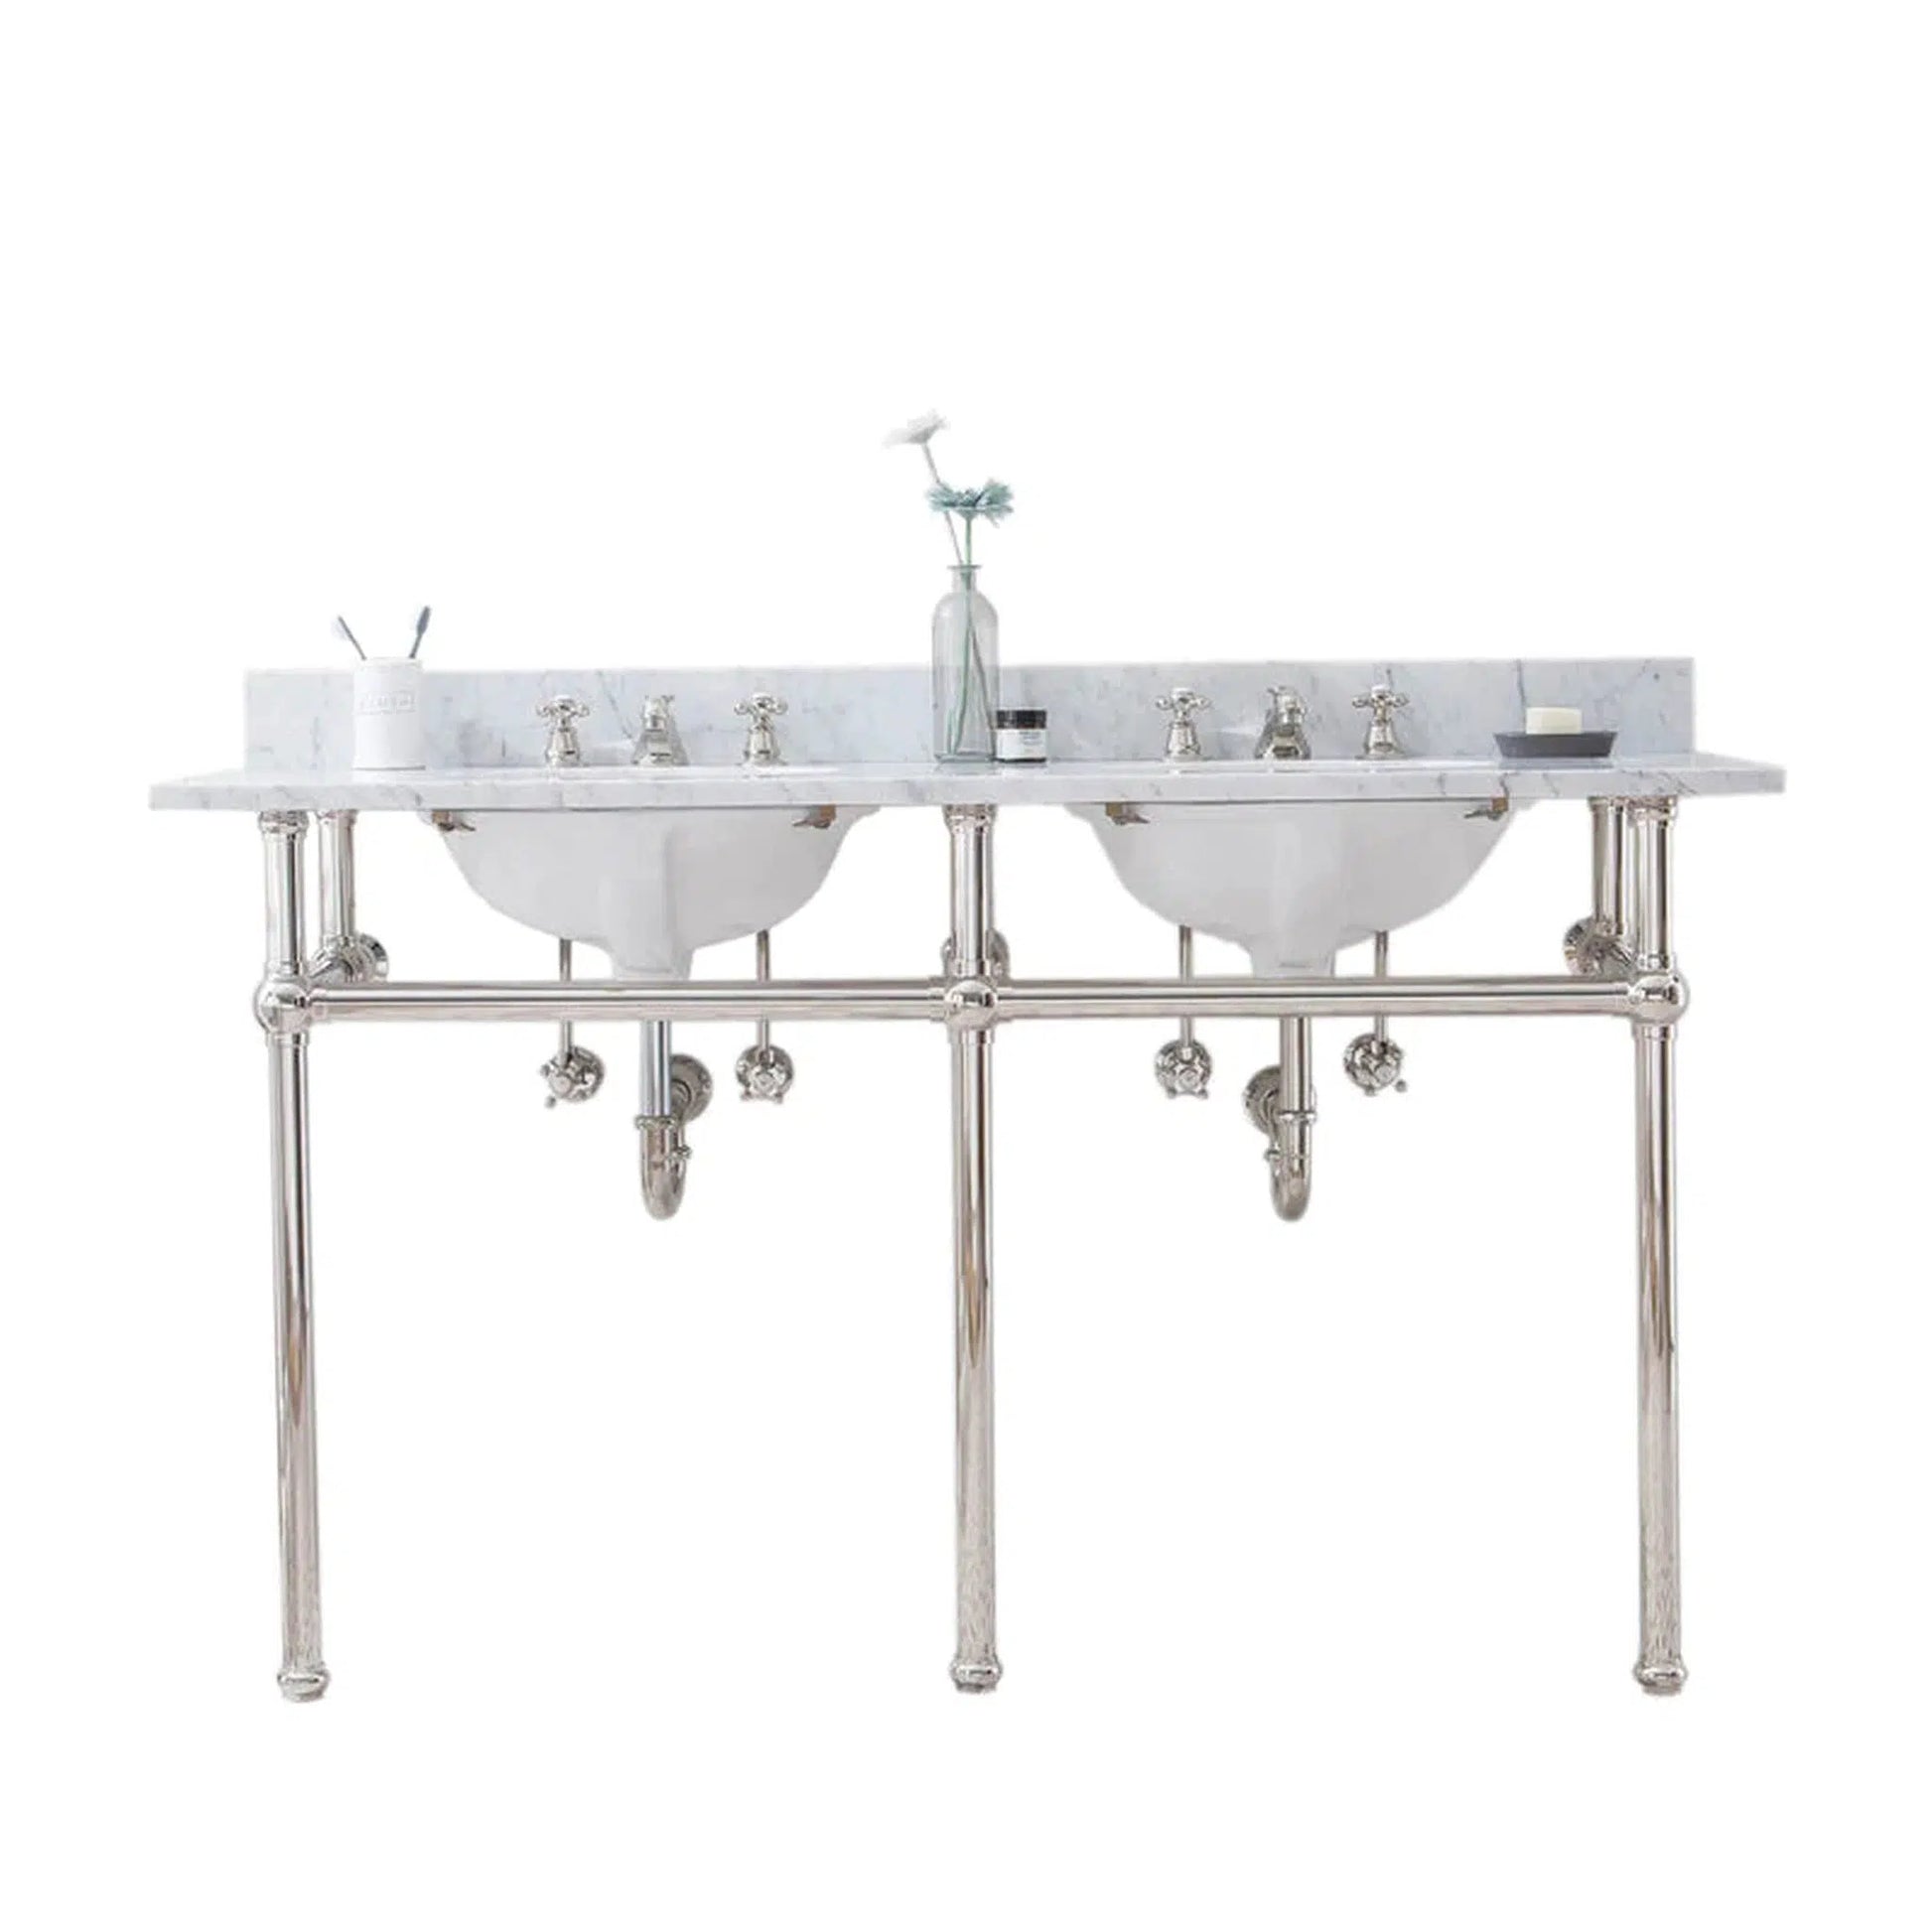 Water Creation Embassy 60 Inch Wide Double Wash Stand, P-Trap, and Counter Top with Basin included in Polished Nickel (PVD) Finish